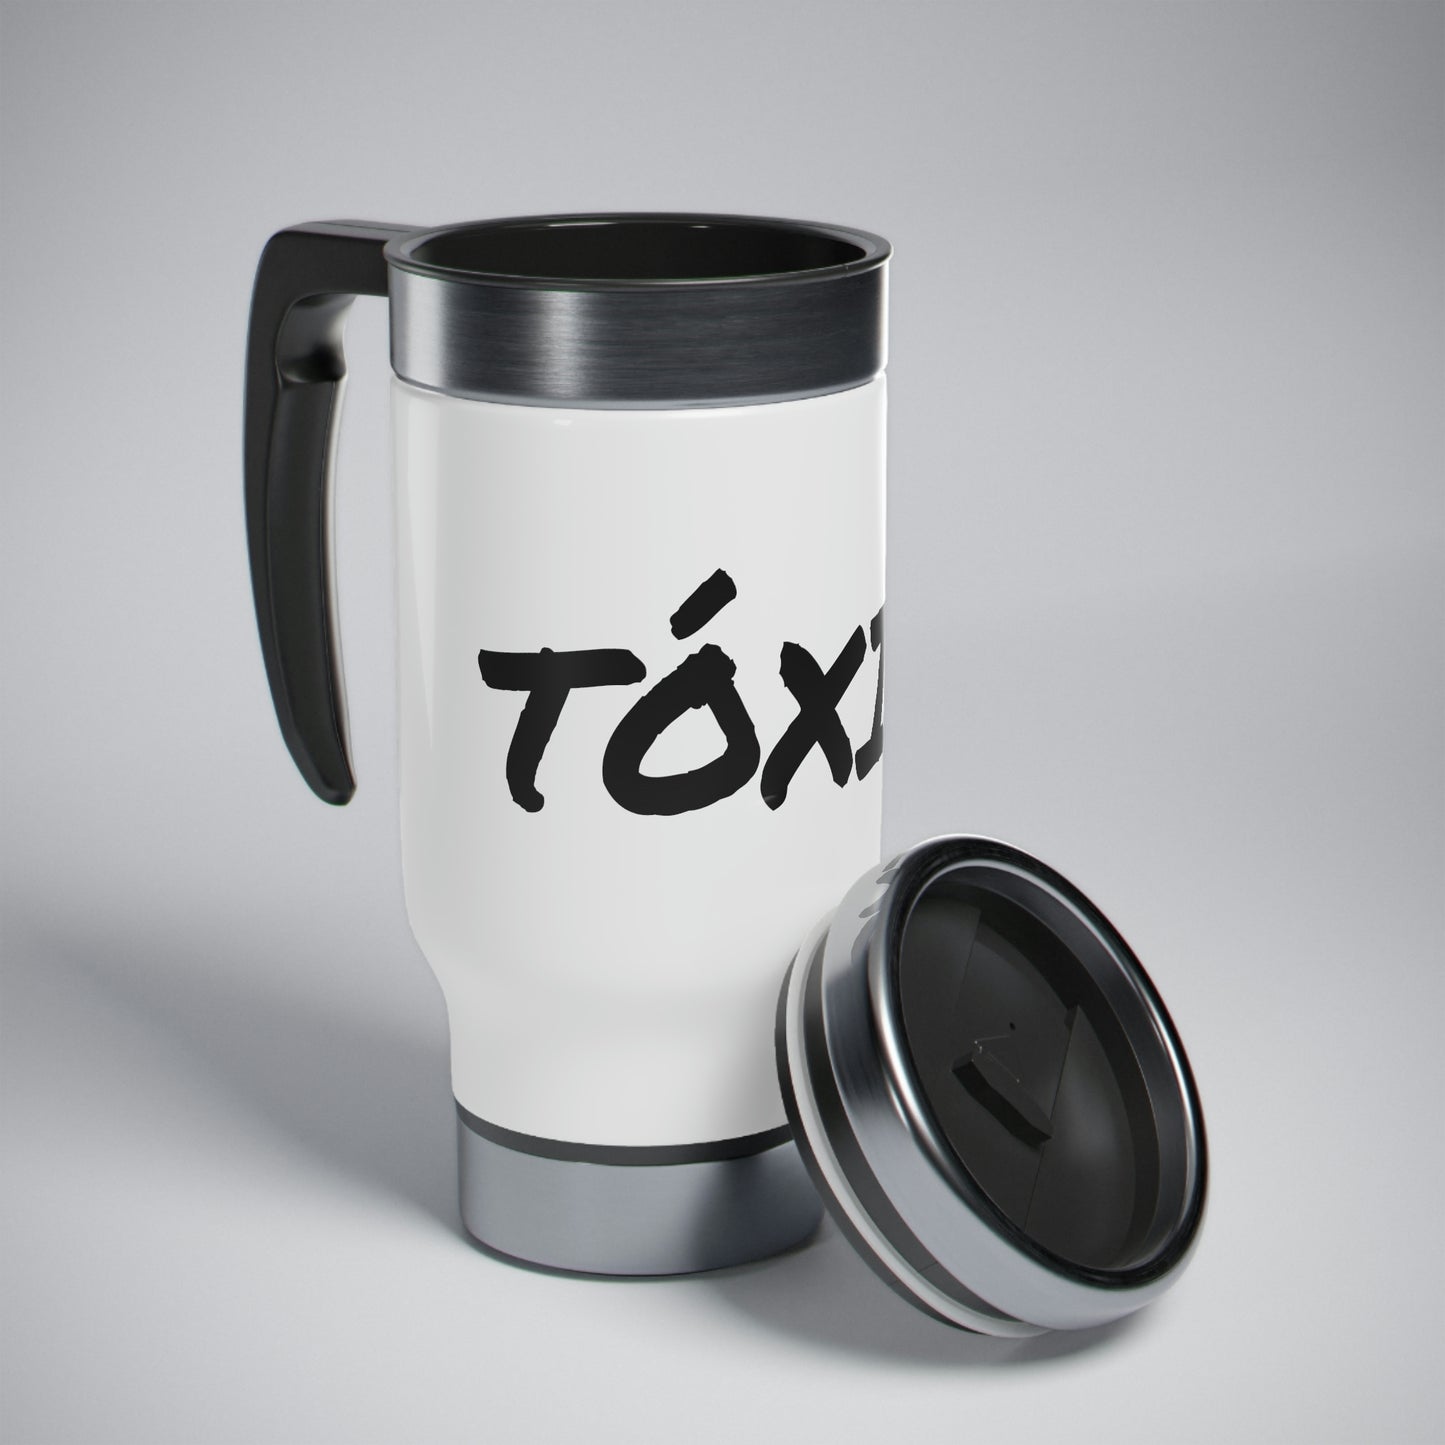 TOXICO Stainless Steel Travel Mug with Handle, 14oz